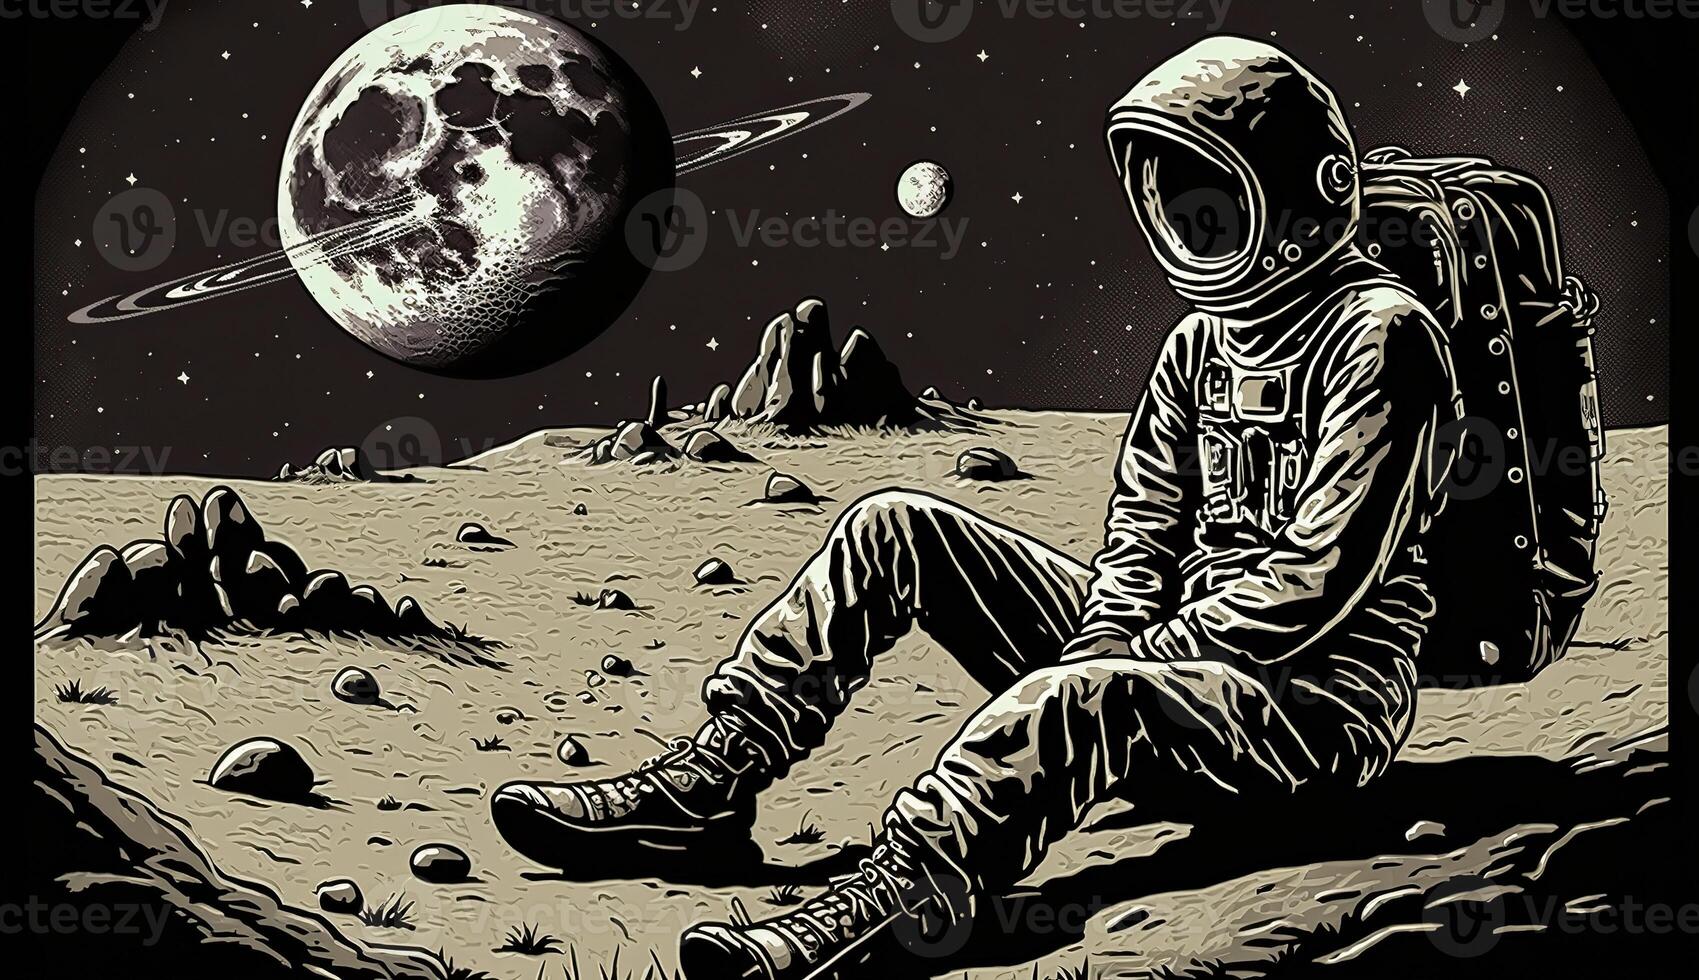 . . Lonely astronaut at galaxy space moon surface. Can be used for graphic design or home posters decoration. Graphic Art. photo